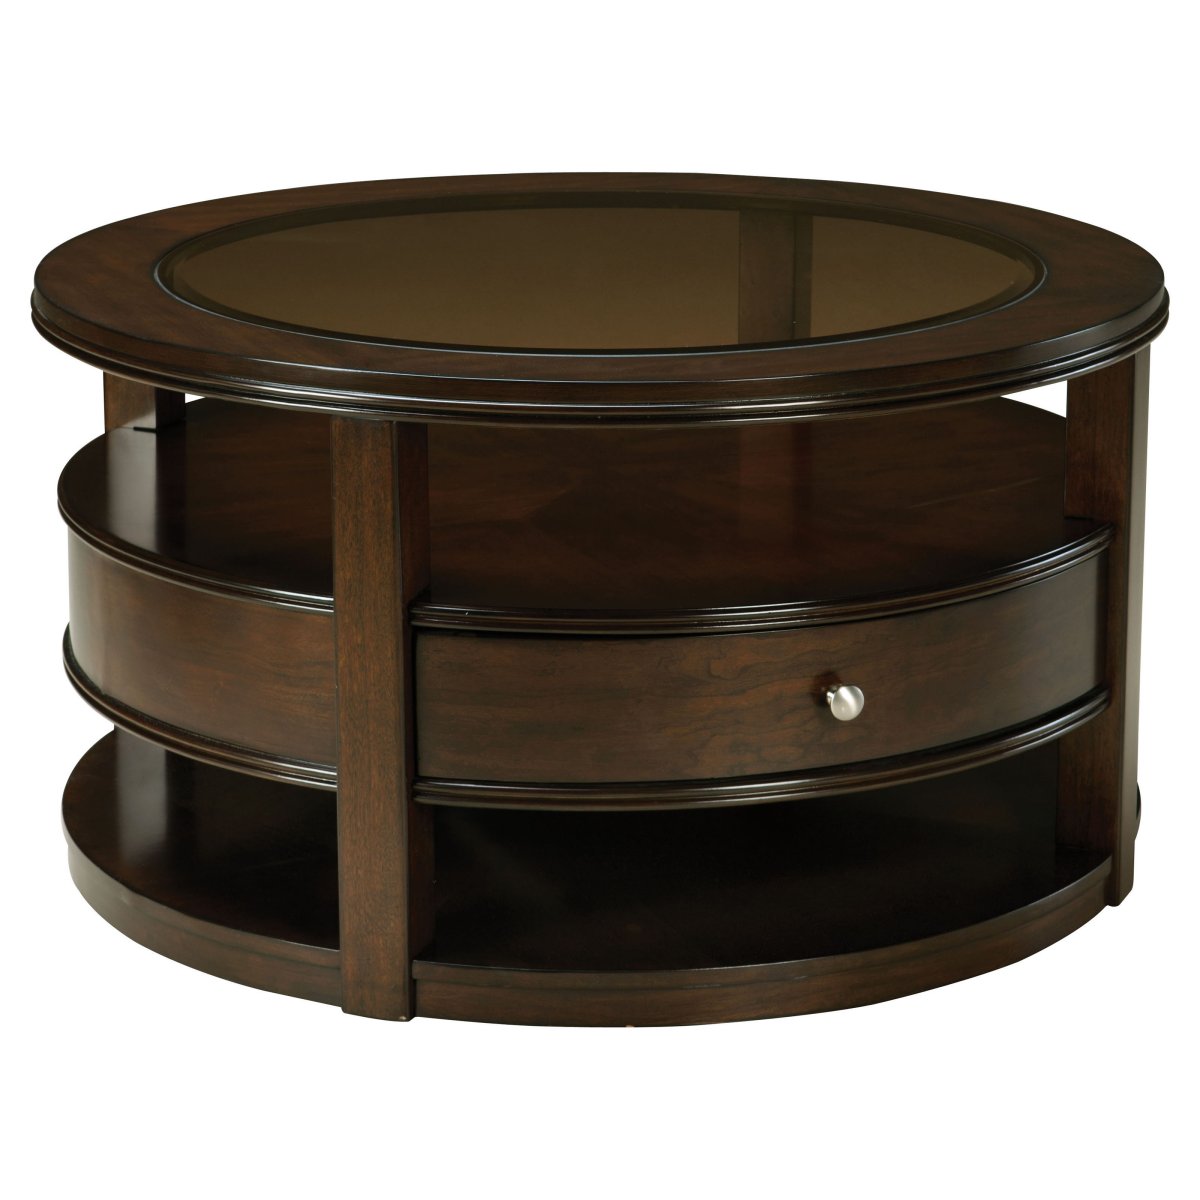 Awesome Round Coffee Tables with Storage HomesFeed